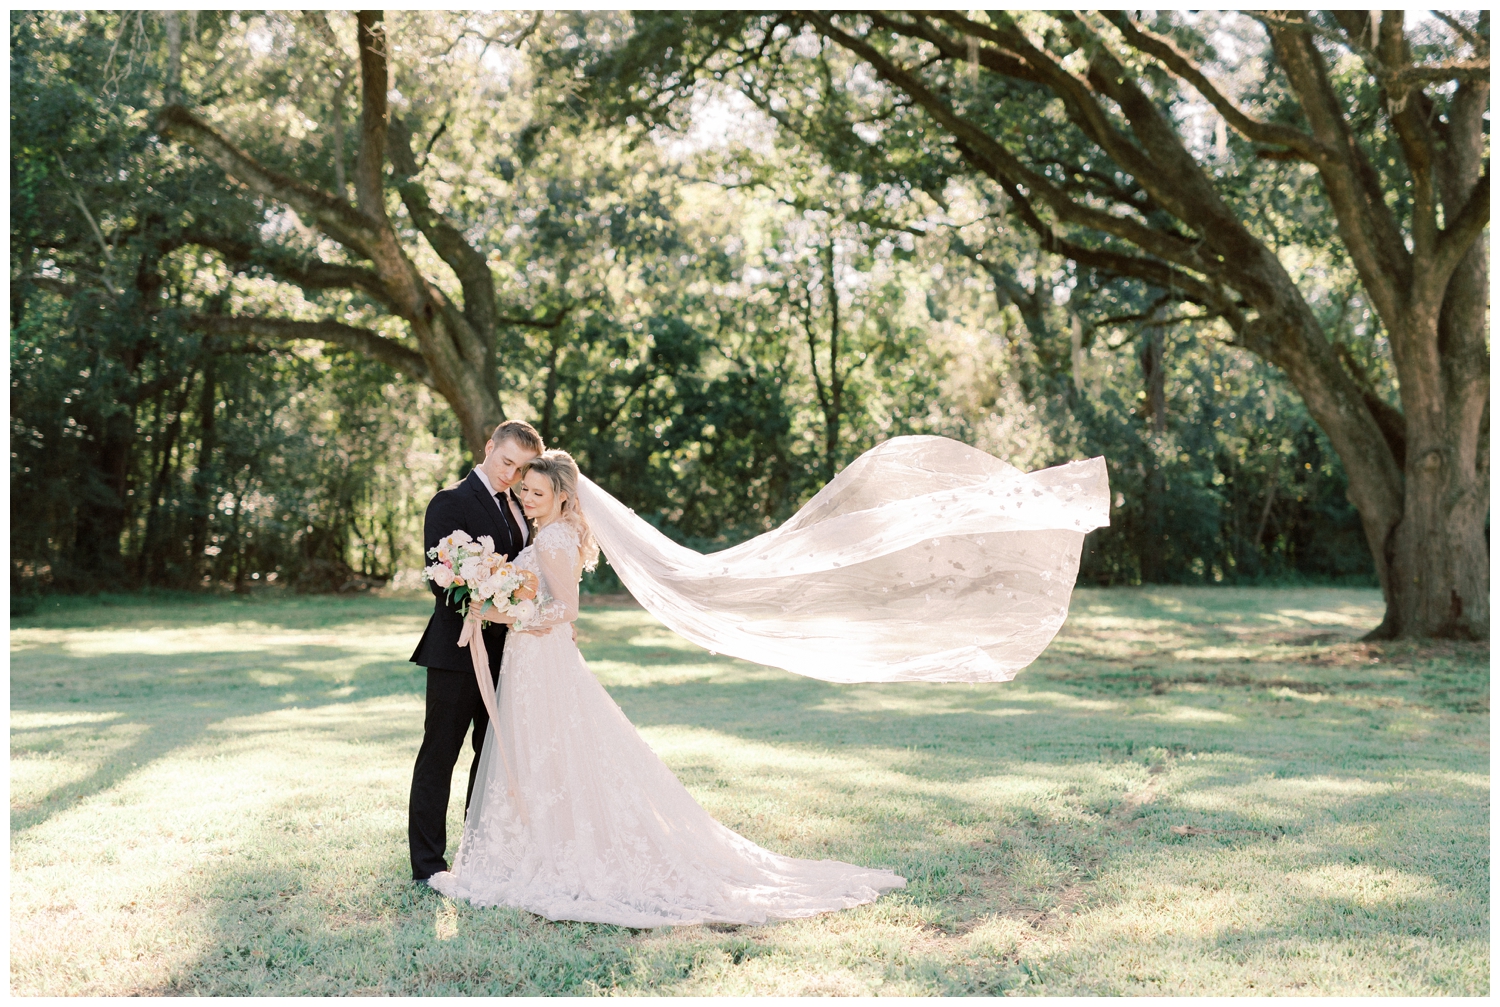 romantic veil toss with bride and groom under oak tree at wedding venue Addison Woods outside Houston Texas